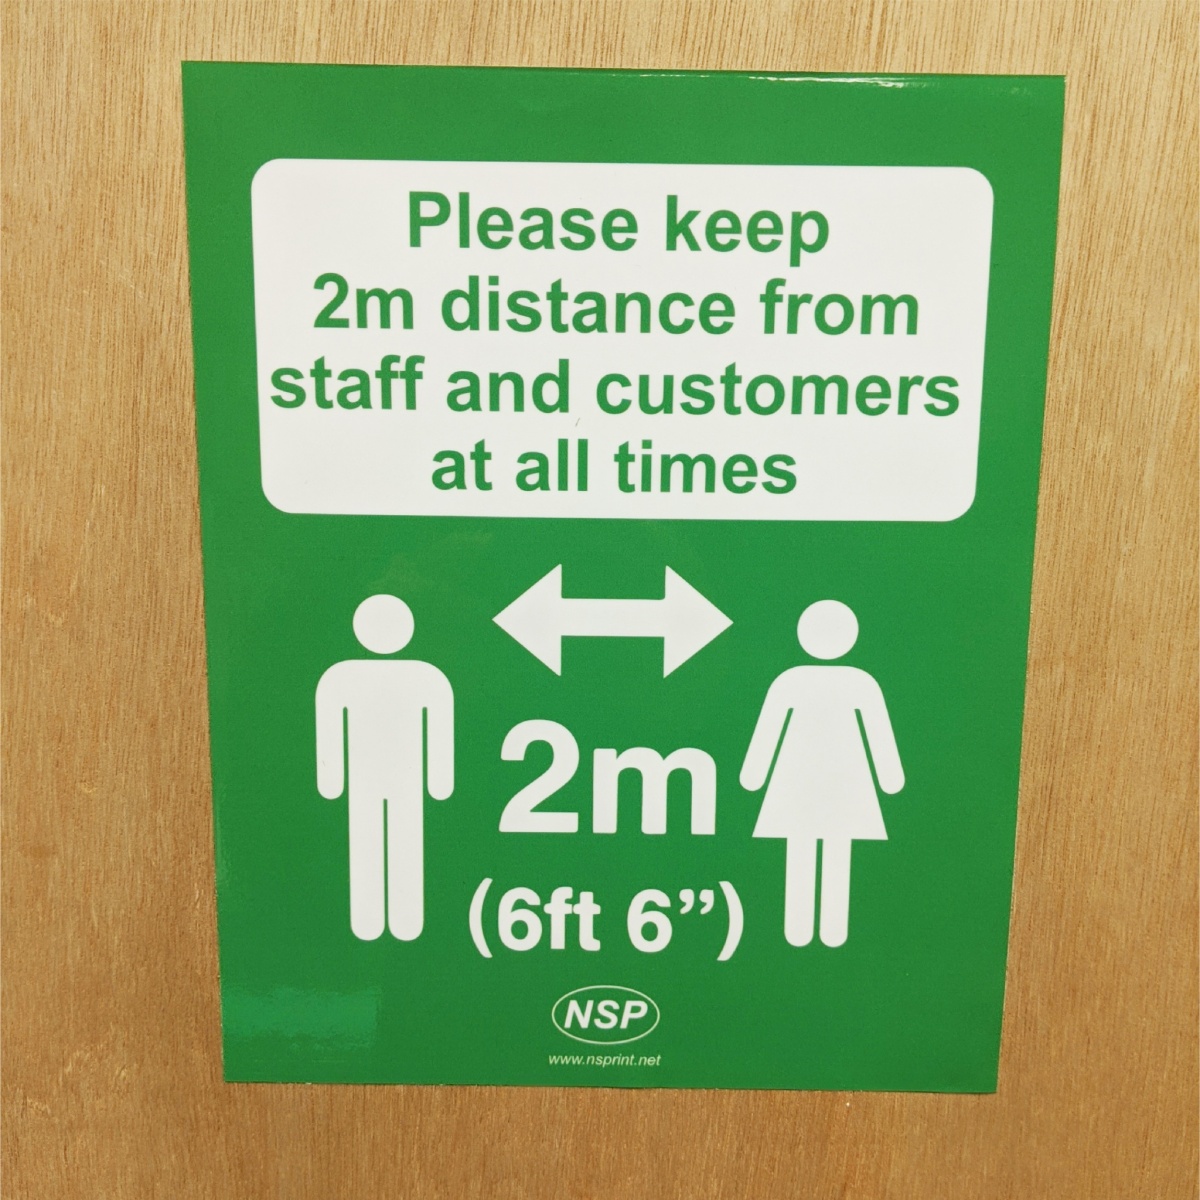 green stickers advising people of social distancing rules in force